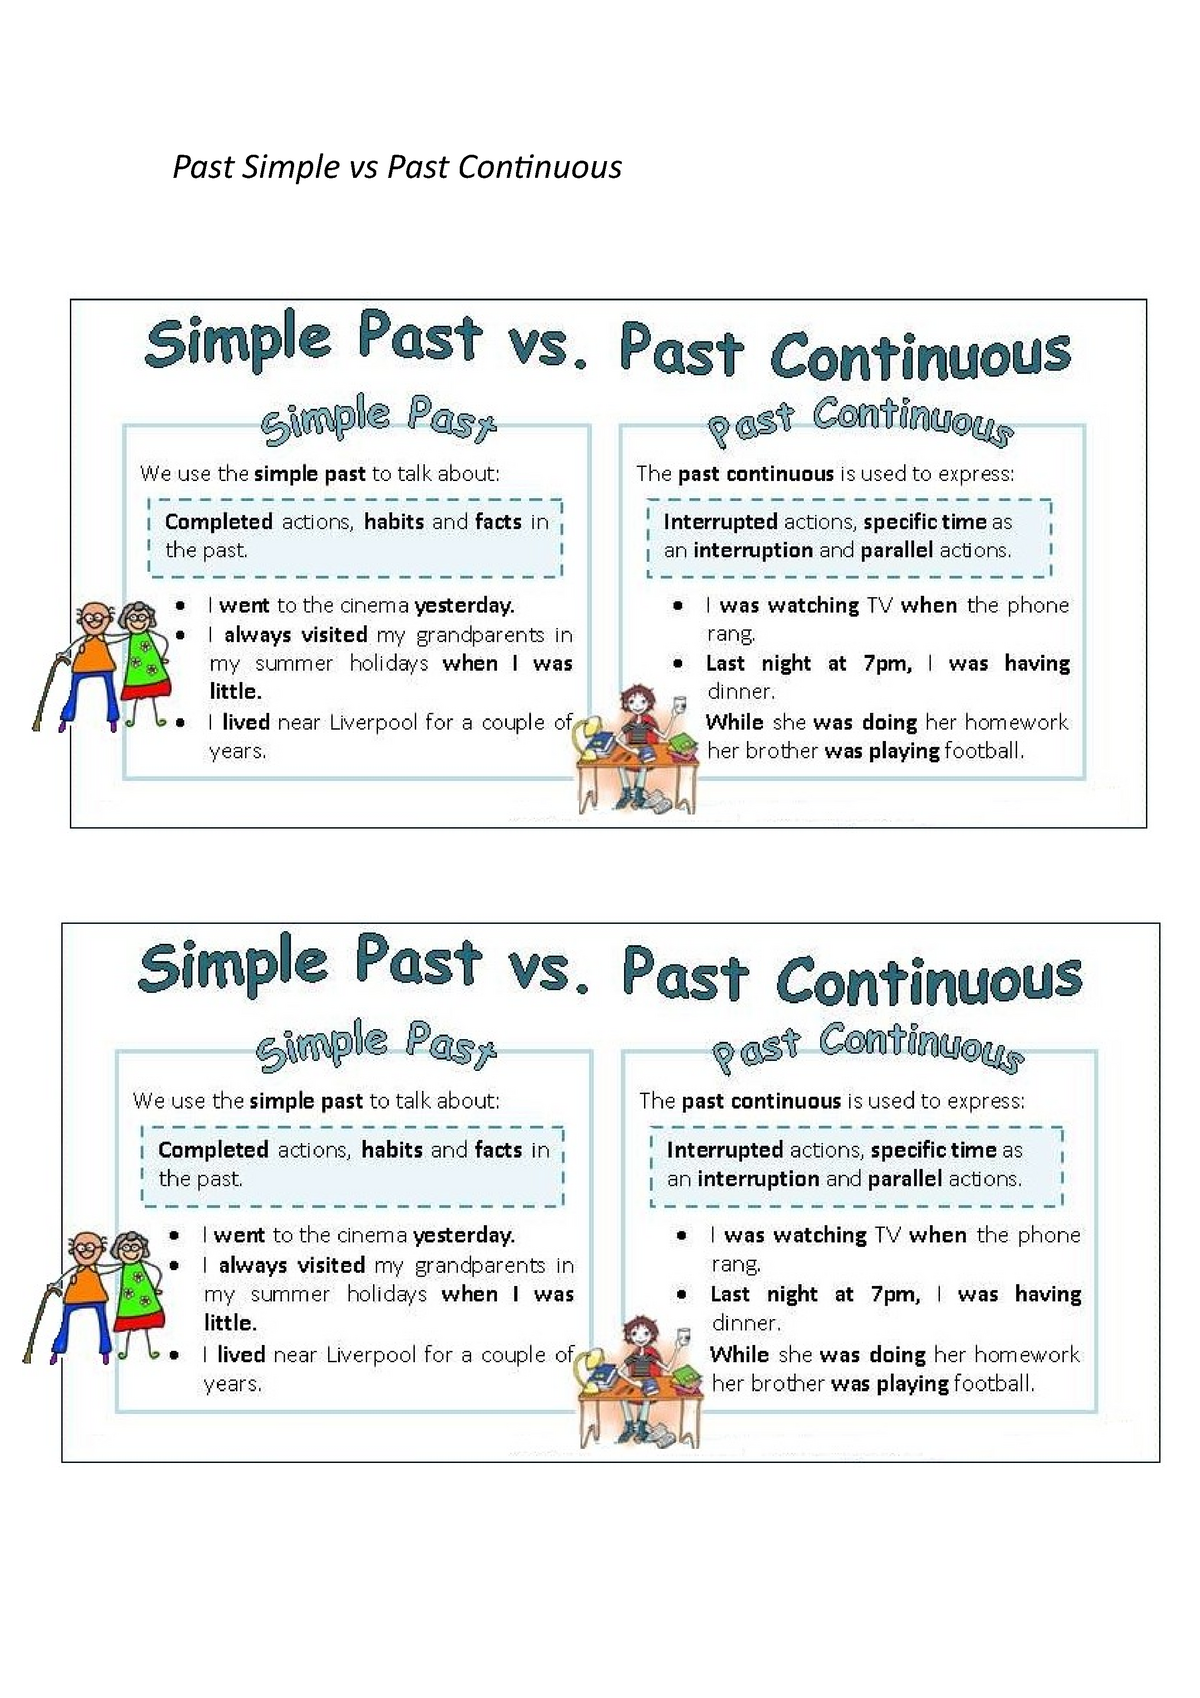 past simple and past continuous essay